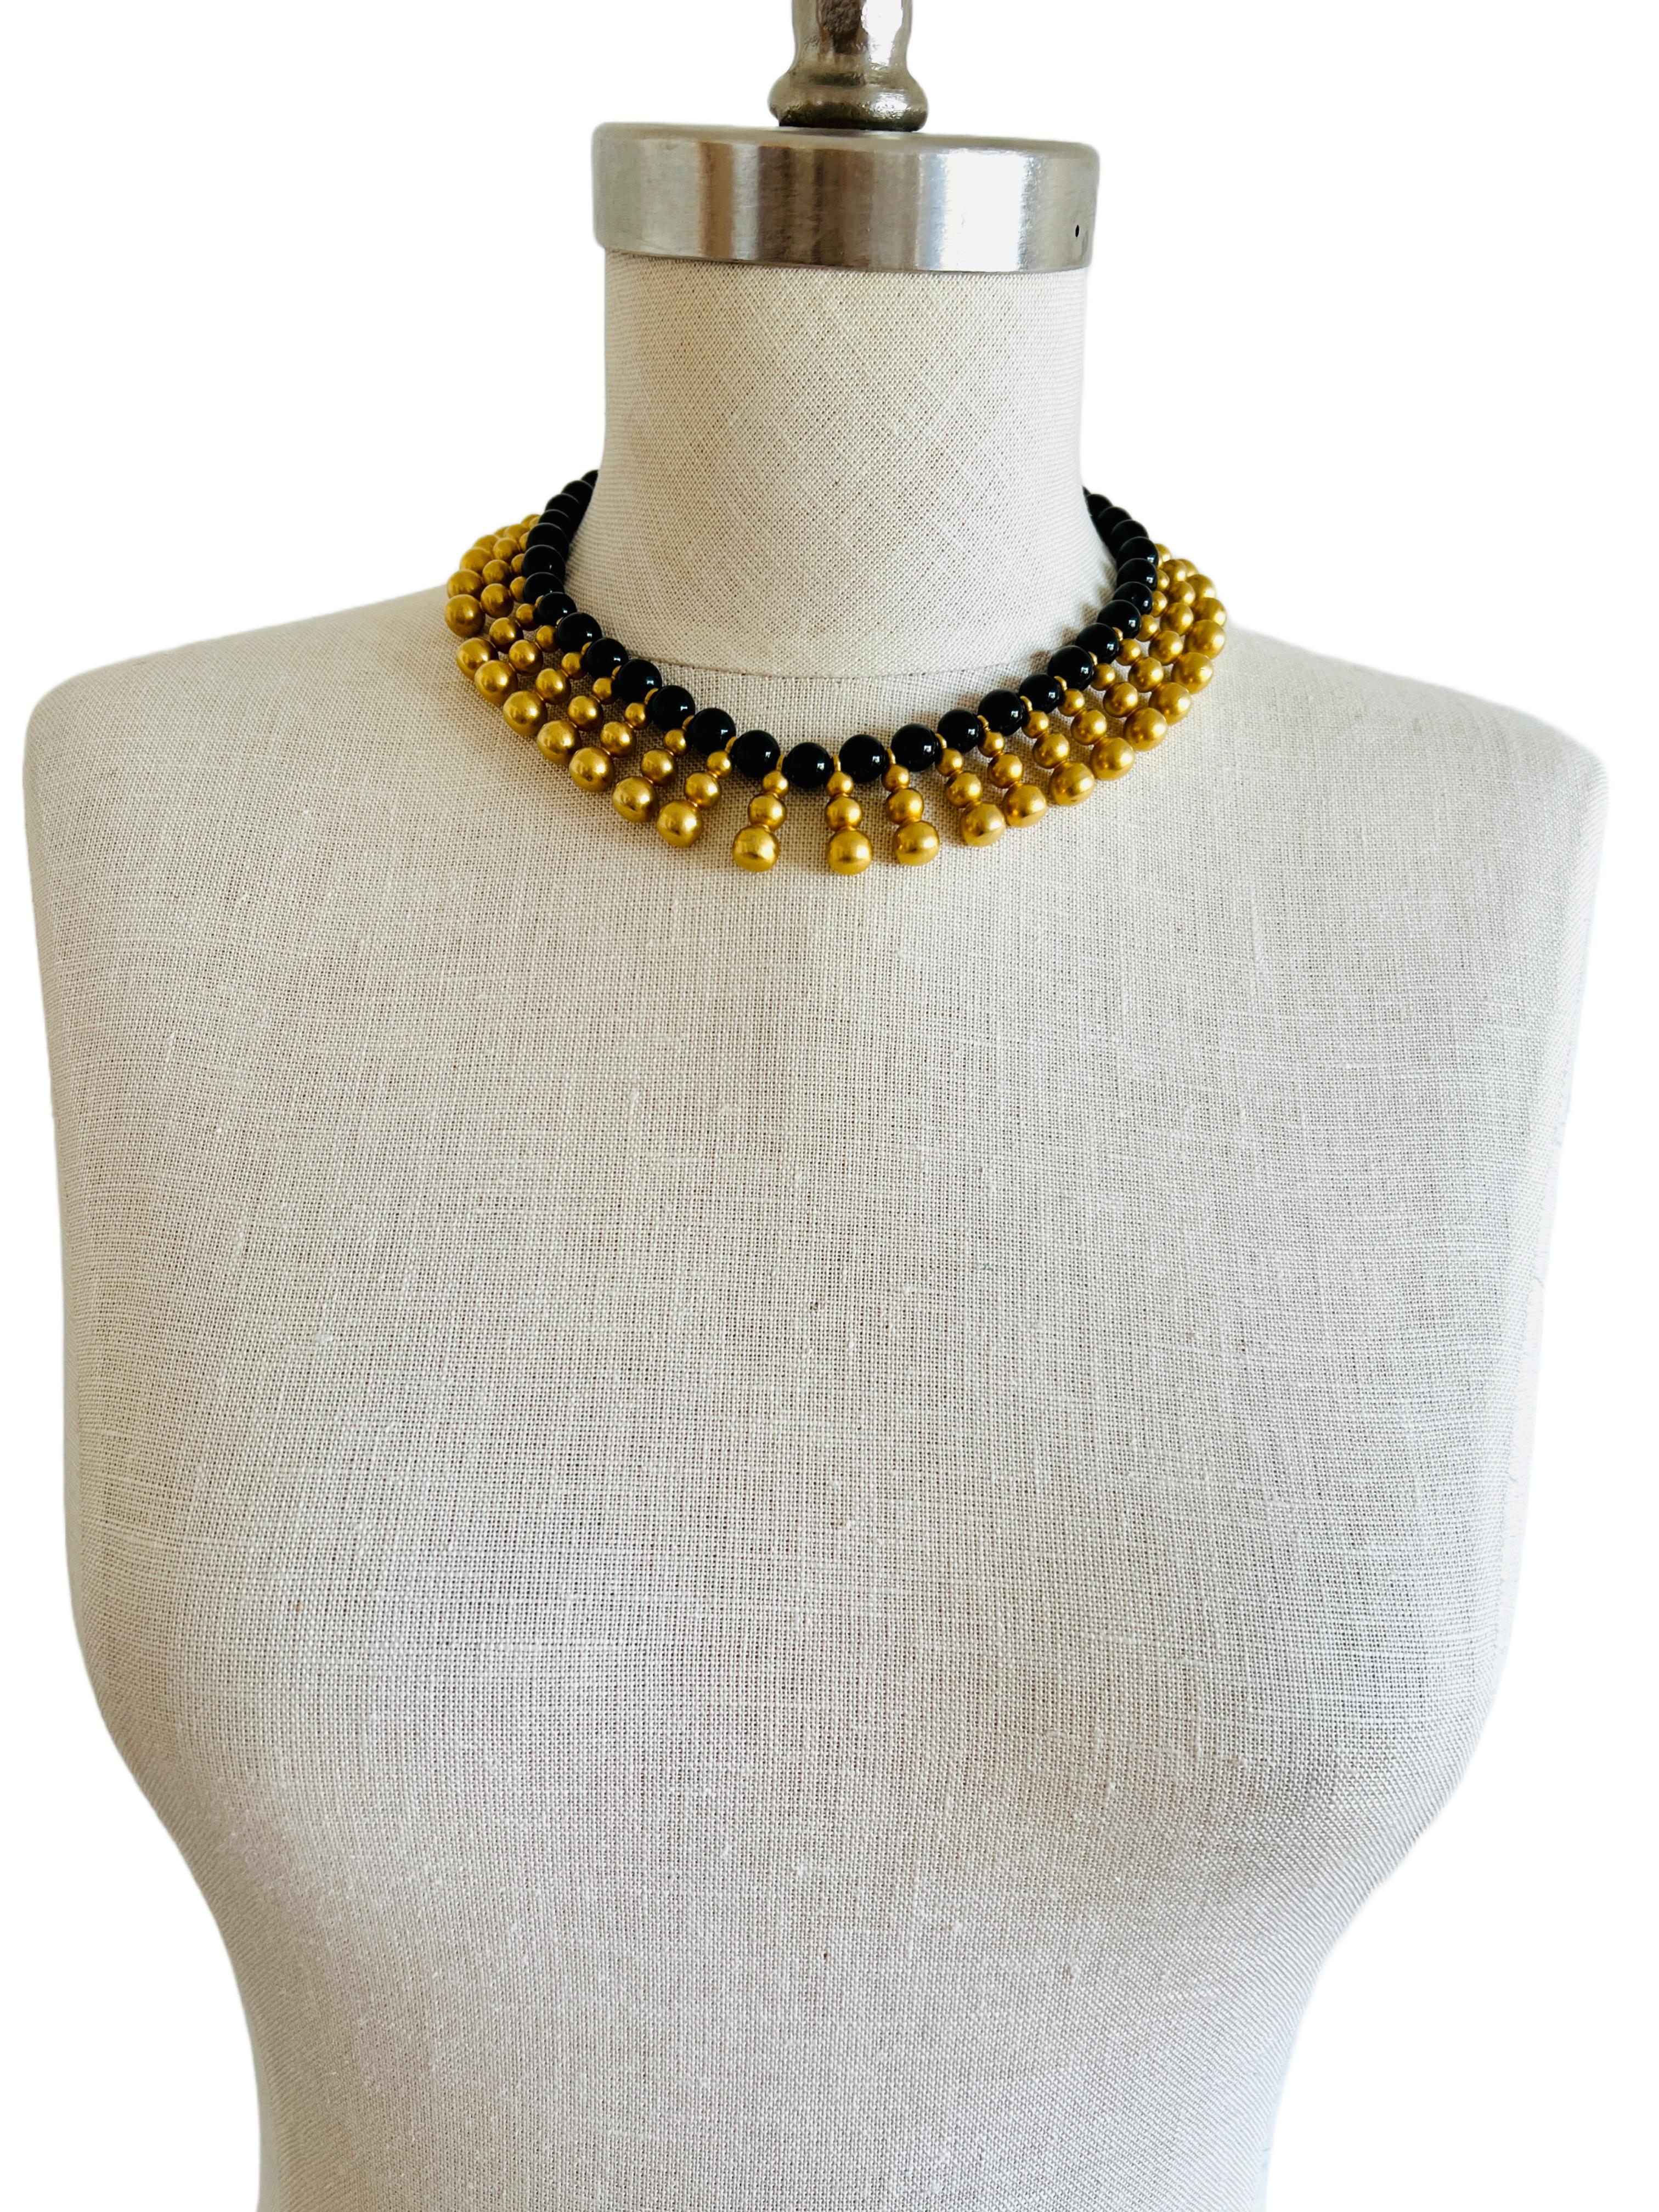 This amazing and rich Egyptian revival bib necklace is very well constructed, weighing 184 grams!

Size: It measures approximately 15.5